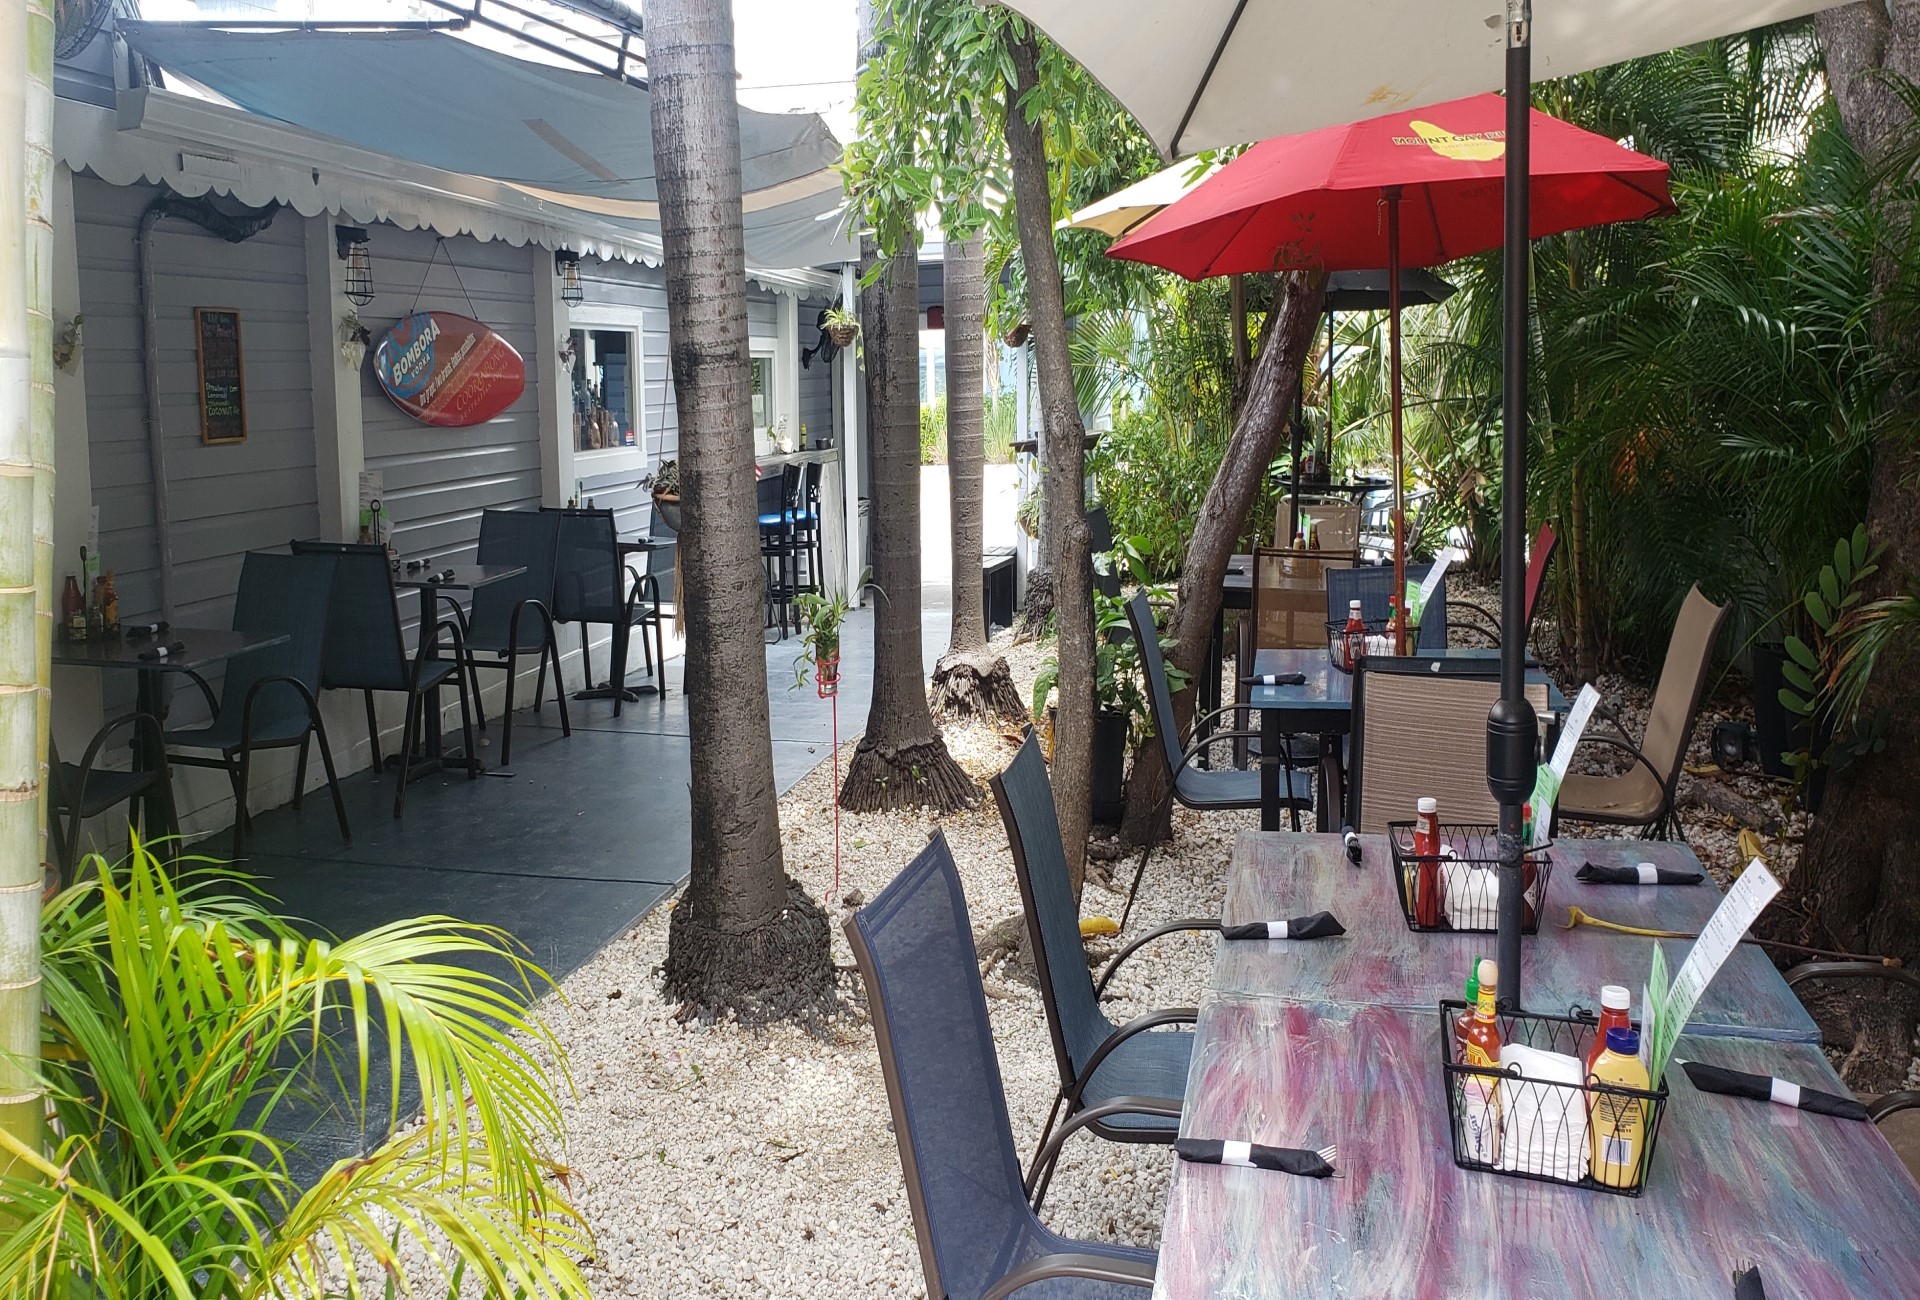 The outdoor relaxing patio dining atmosphere at Off the Hook Bar and Grill in Key West